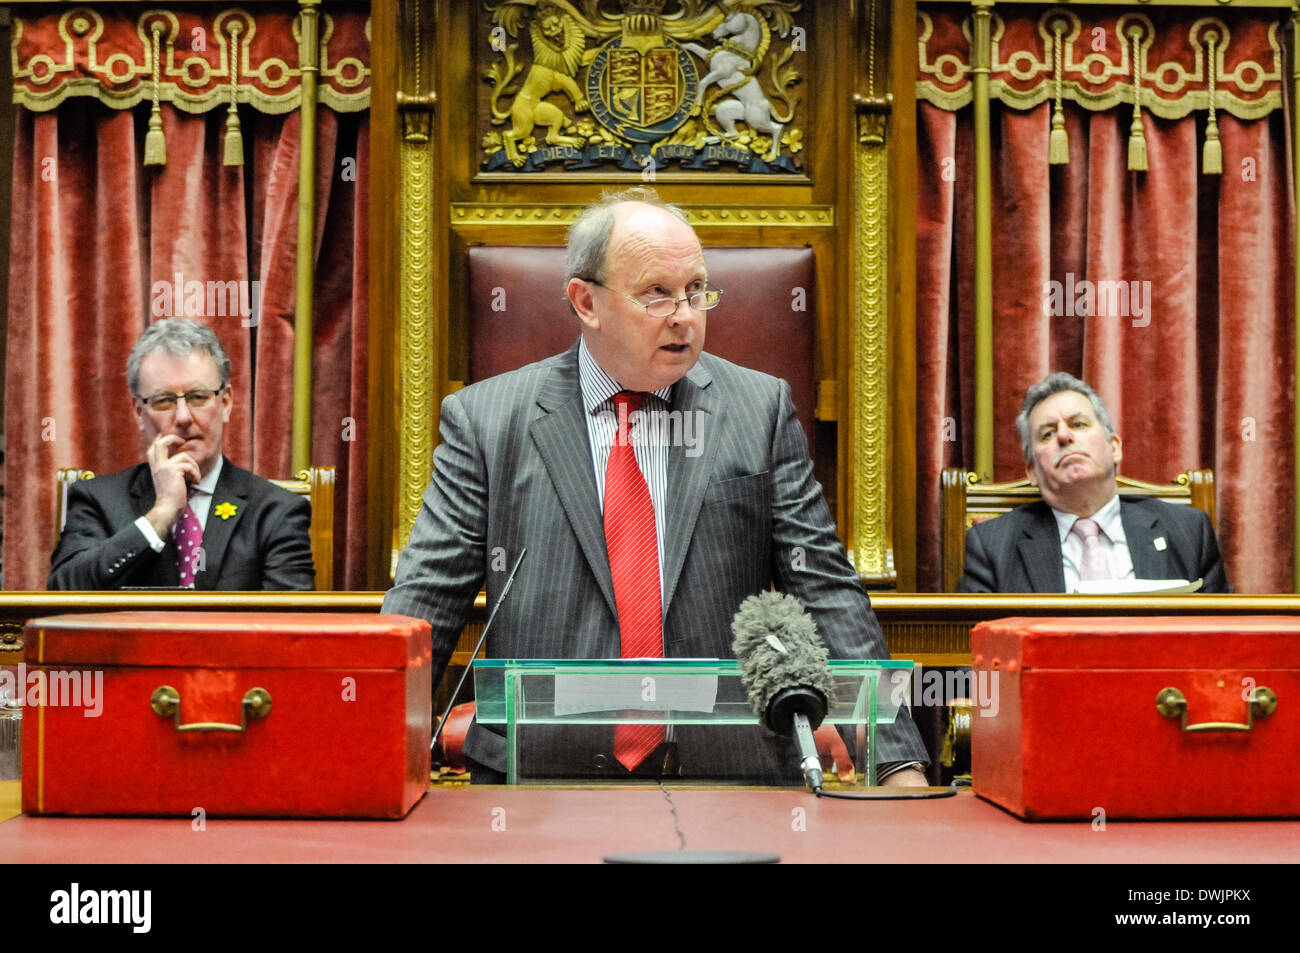 Belfast, Northern Ireland. 10 Mar 2014 - Jim Allister (TUV) speaking in the Senate Chamber, Parliament Buildings, Mike Nesbitt (UUP Leader) and Alban Maguinness (SDLP) behind, Stormont. Credit:  Stephen Barnes/Alamy Live News Stock Photo